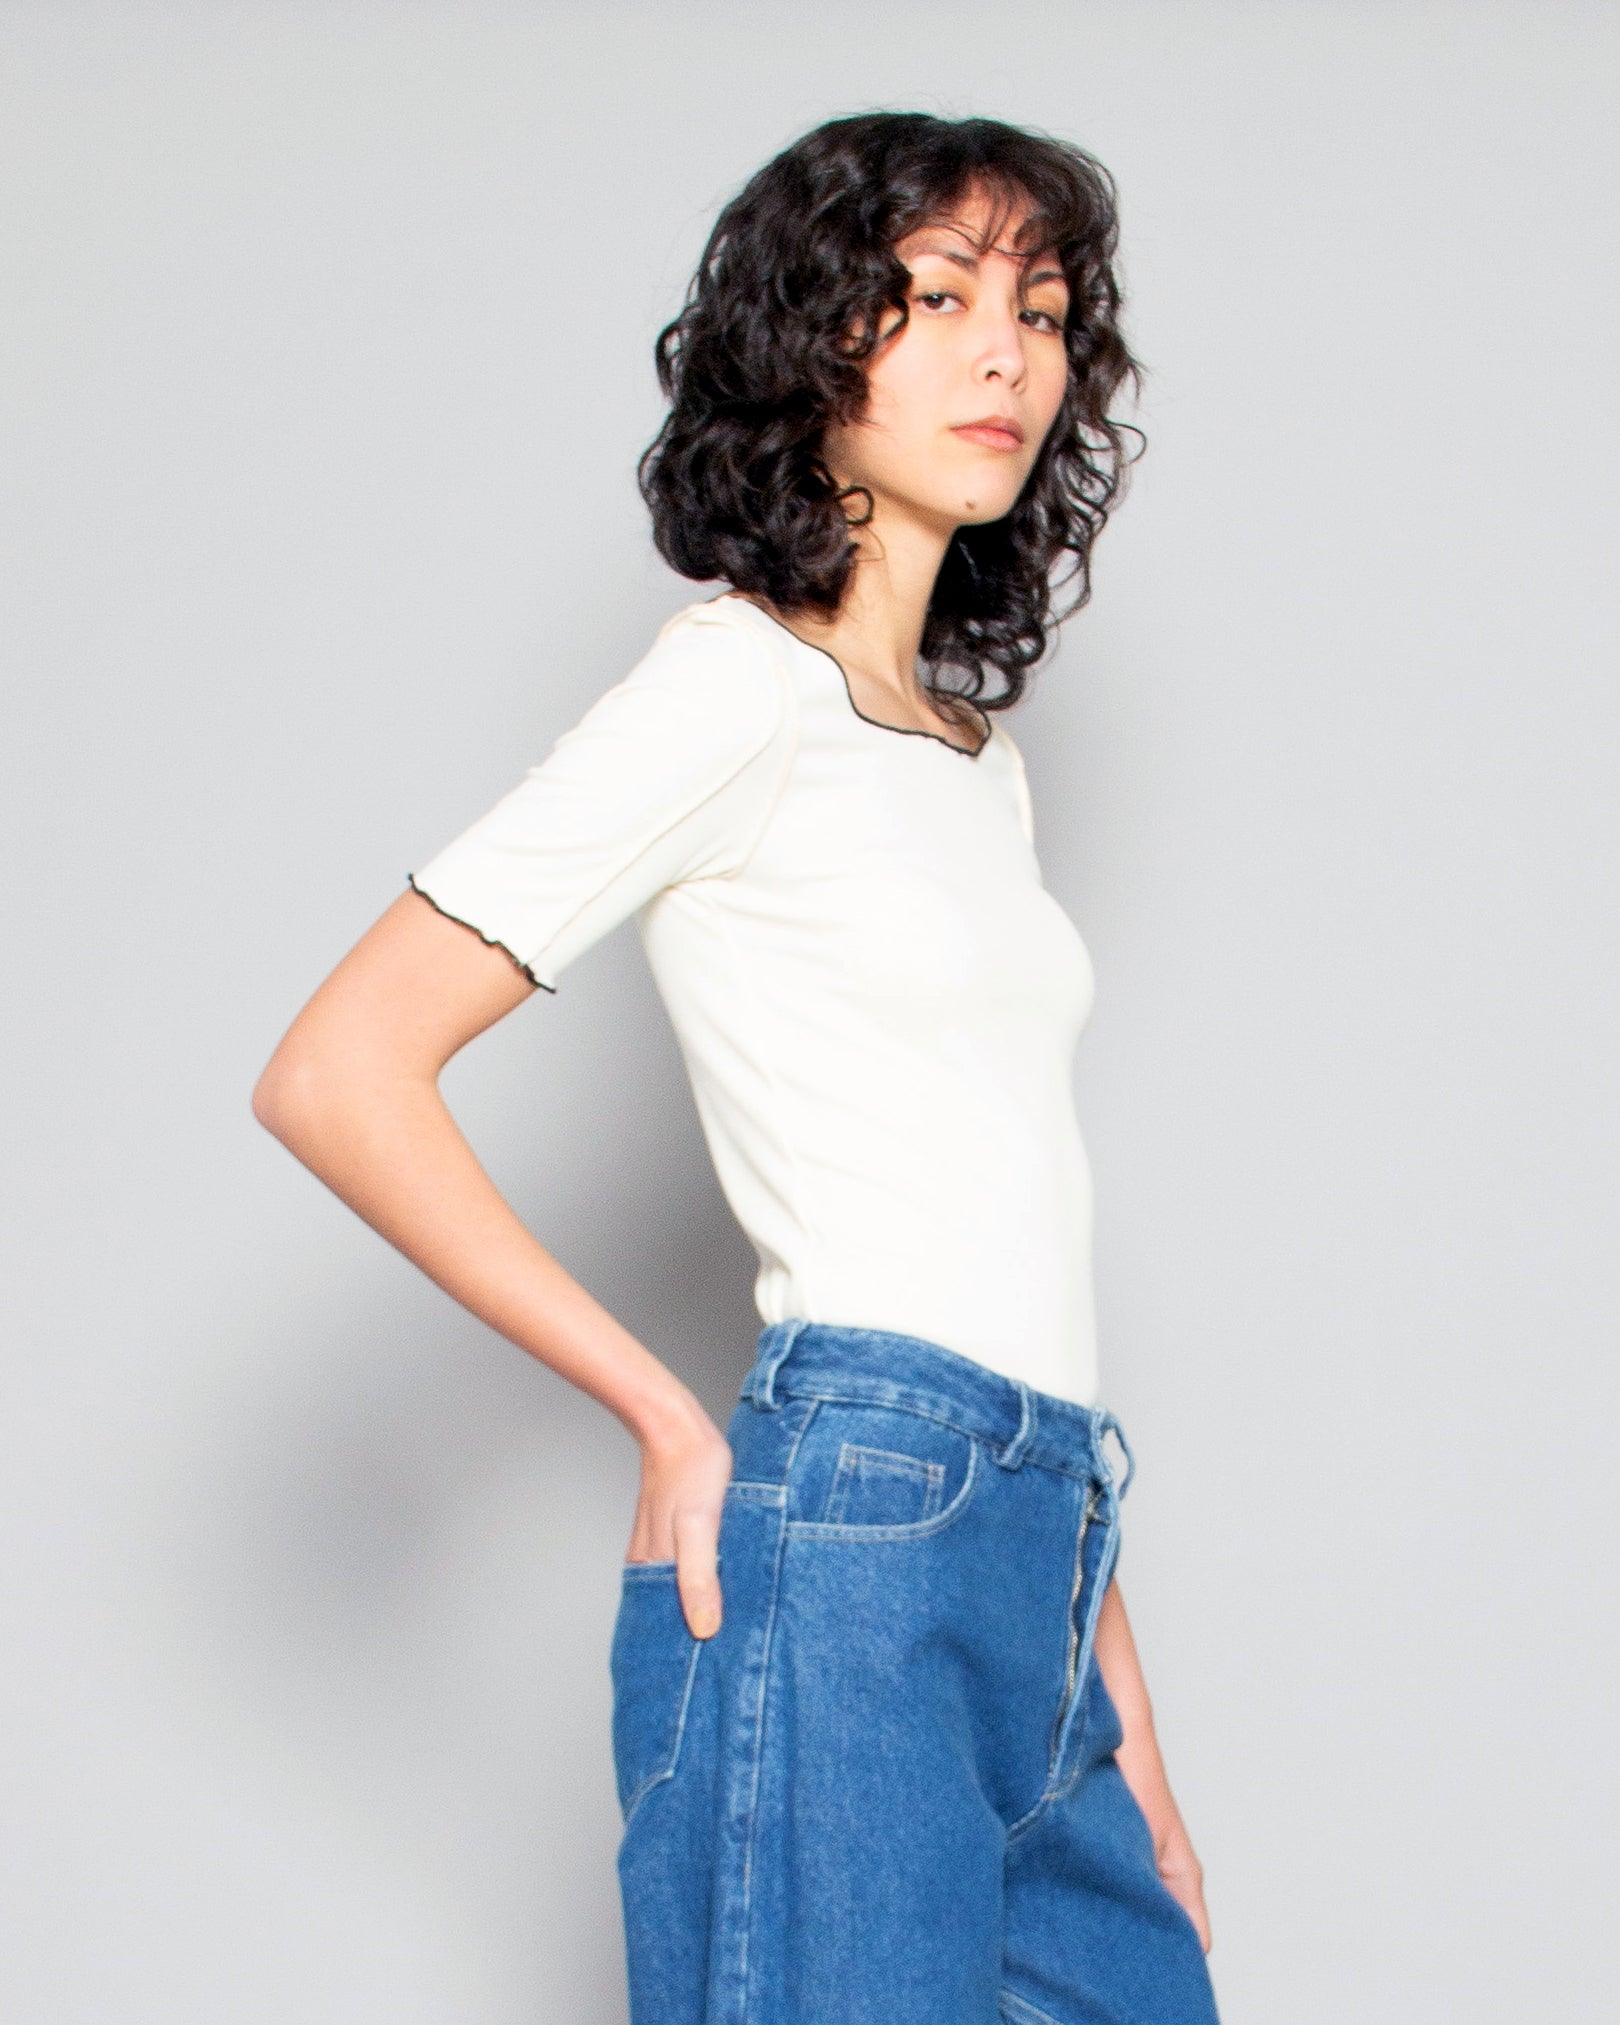 PERSONS Hayes Contrast Rib Tee in Cream available at Lahn.shop